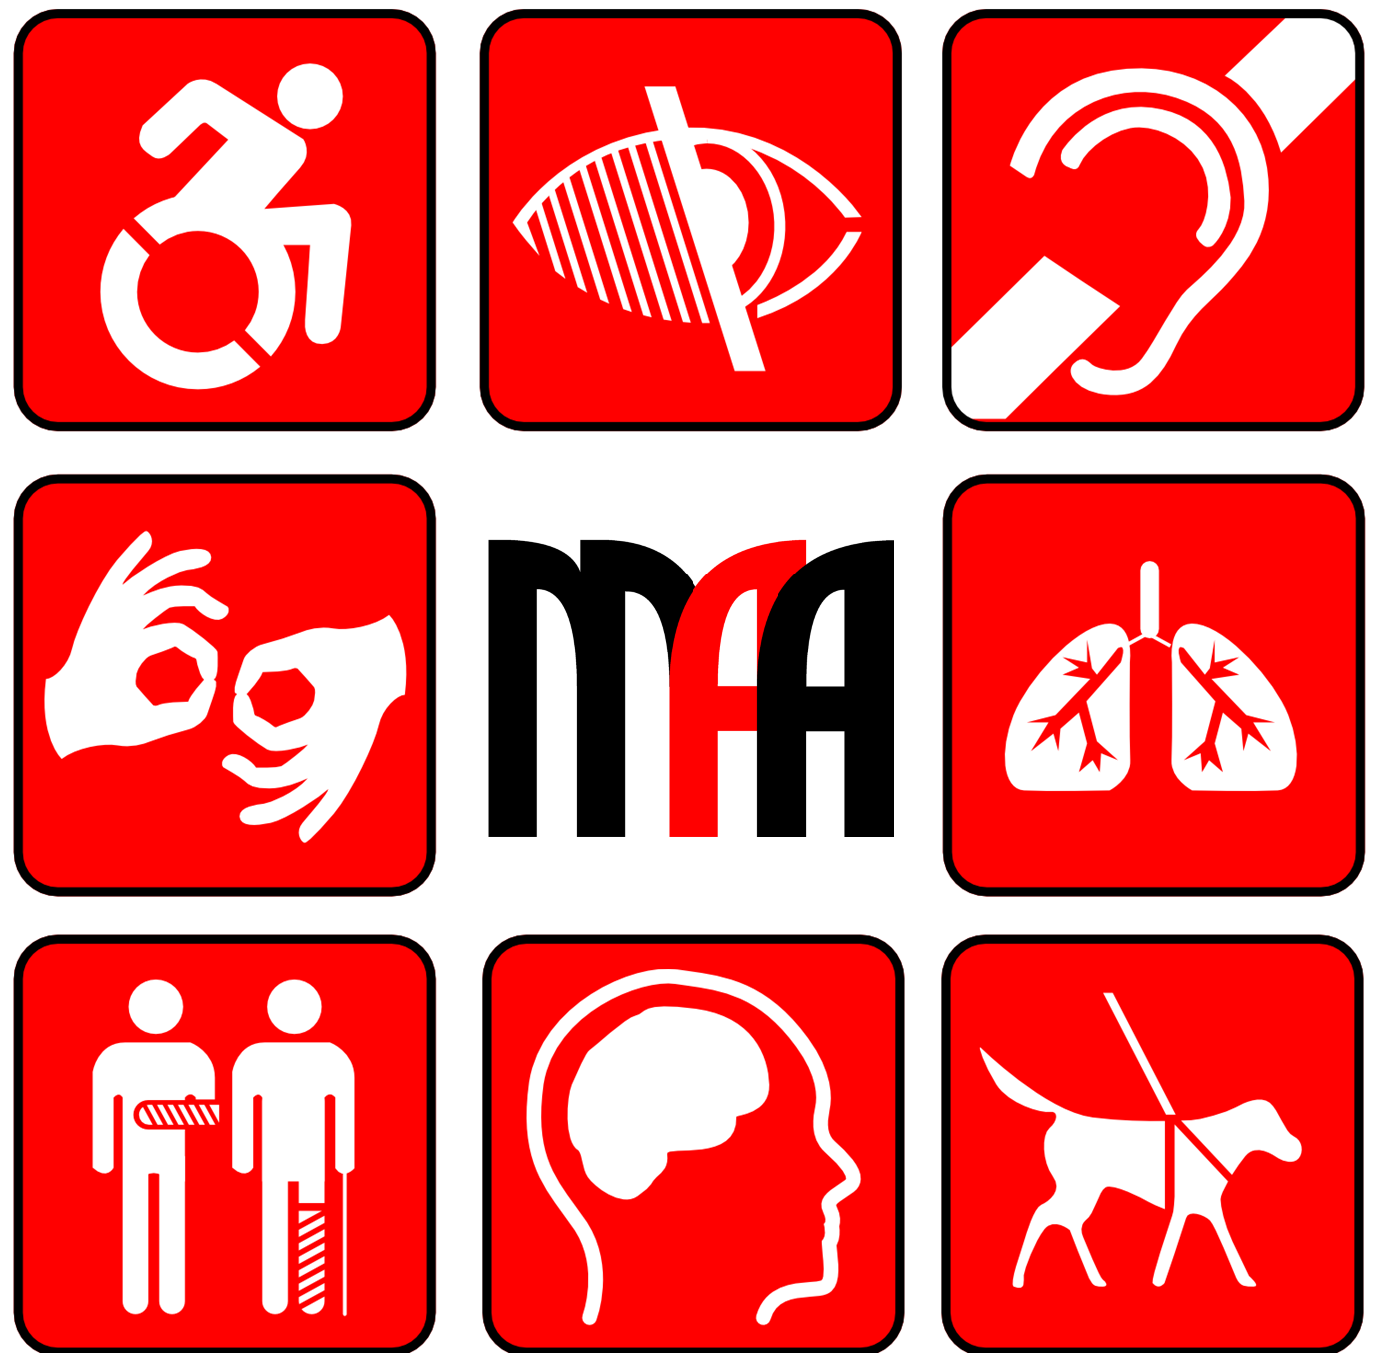 Melbourne Access Audits Logo 8 disability types pictograms